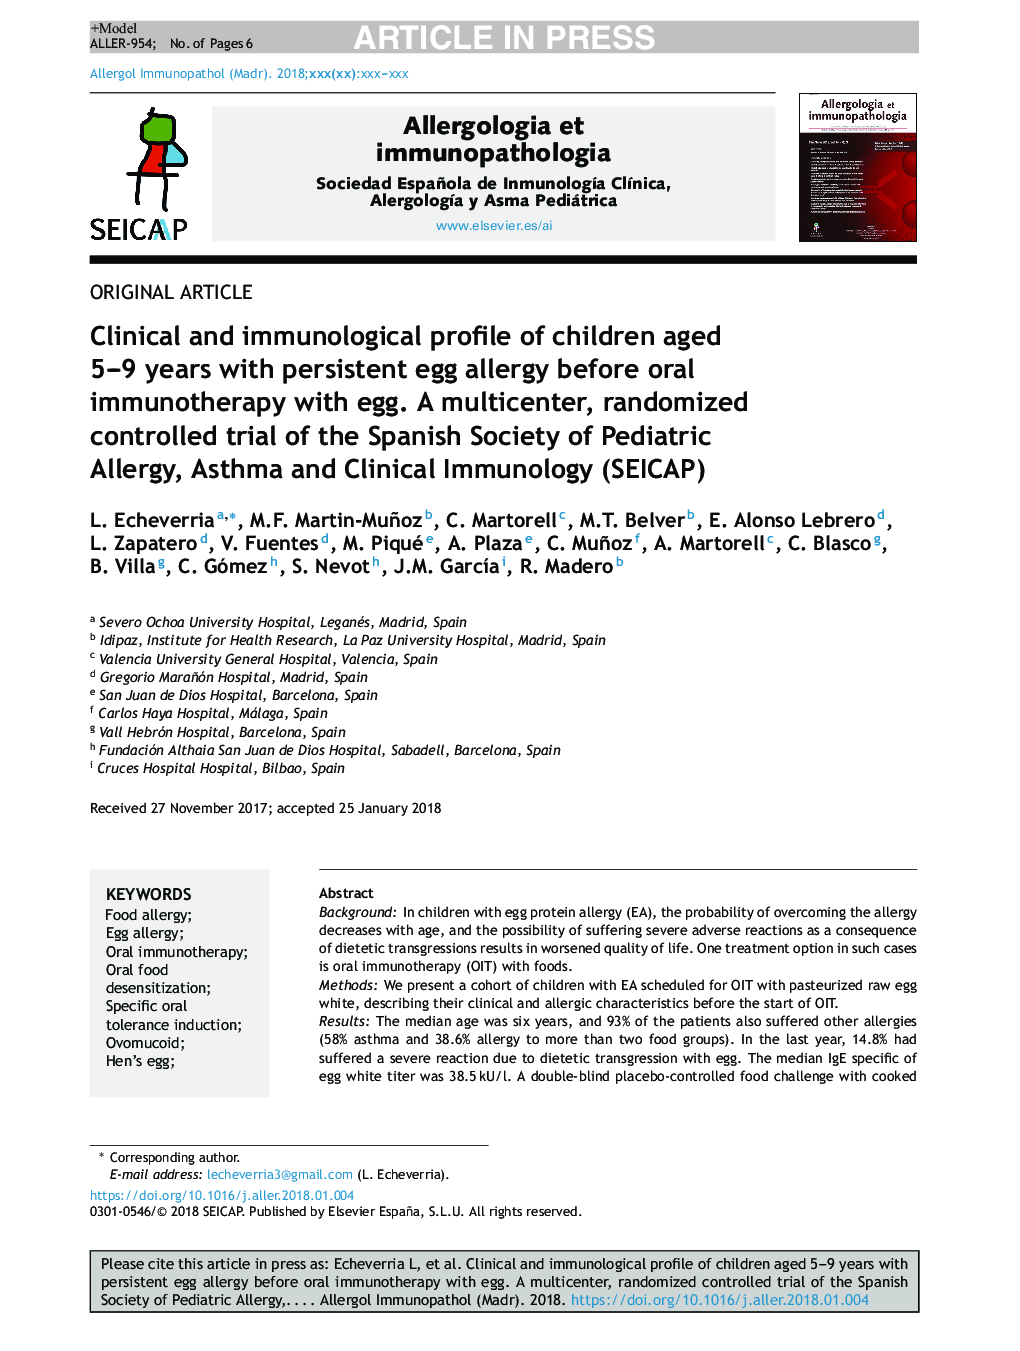 Clinical and immunological profile of children aged 5-9 years with persistent egg allergy before oral immunotherapy with egg. A multicenter, randomized controlled trial of the Spanish Society of Pediatric Allergy, Asthma and Clinical Immunology (SEICAP)